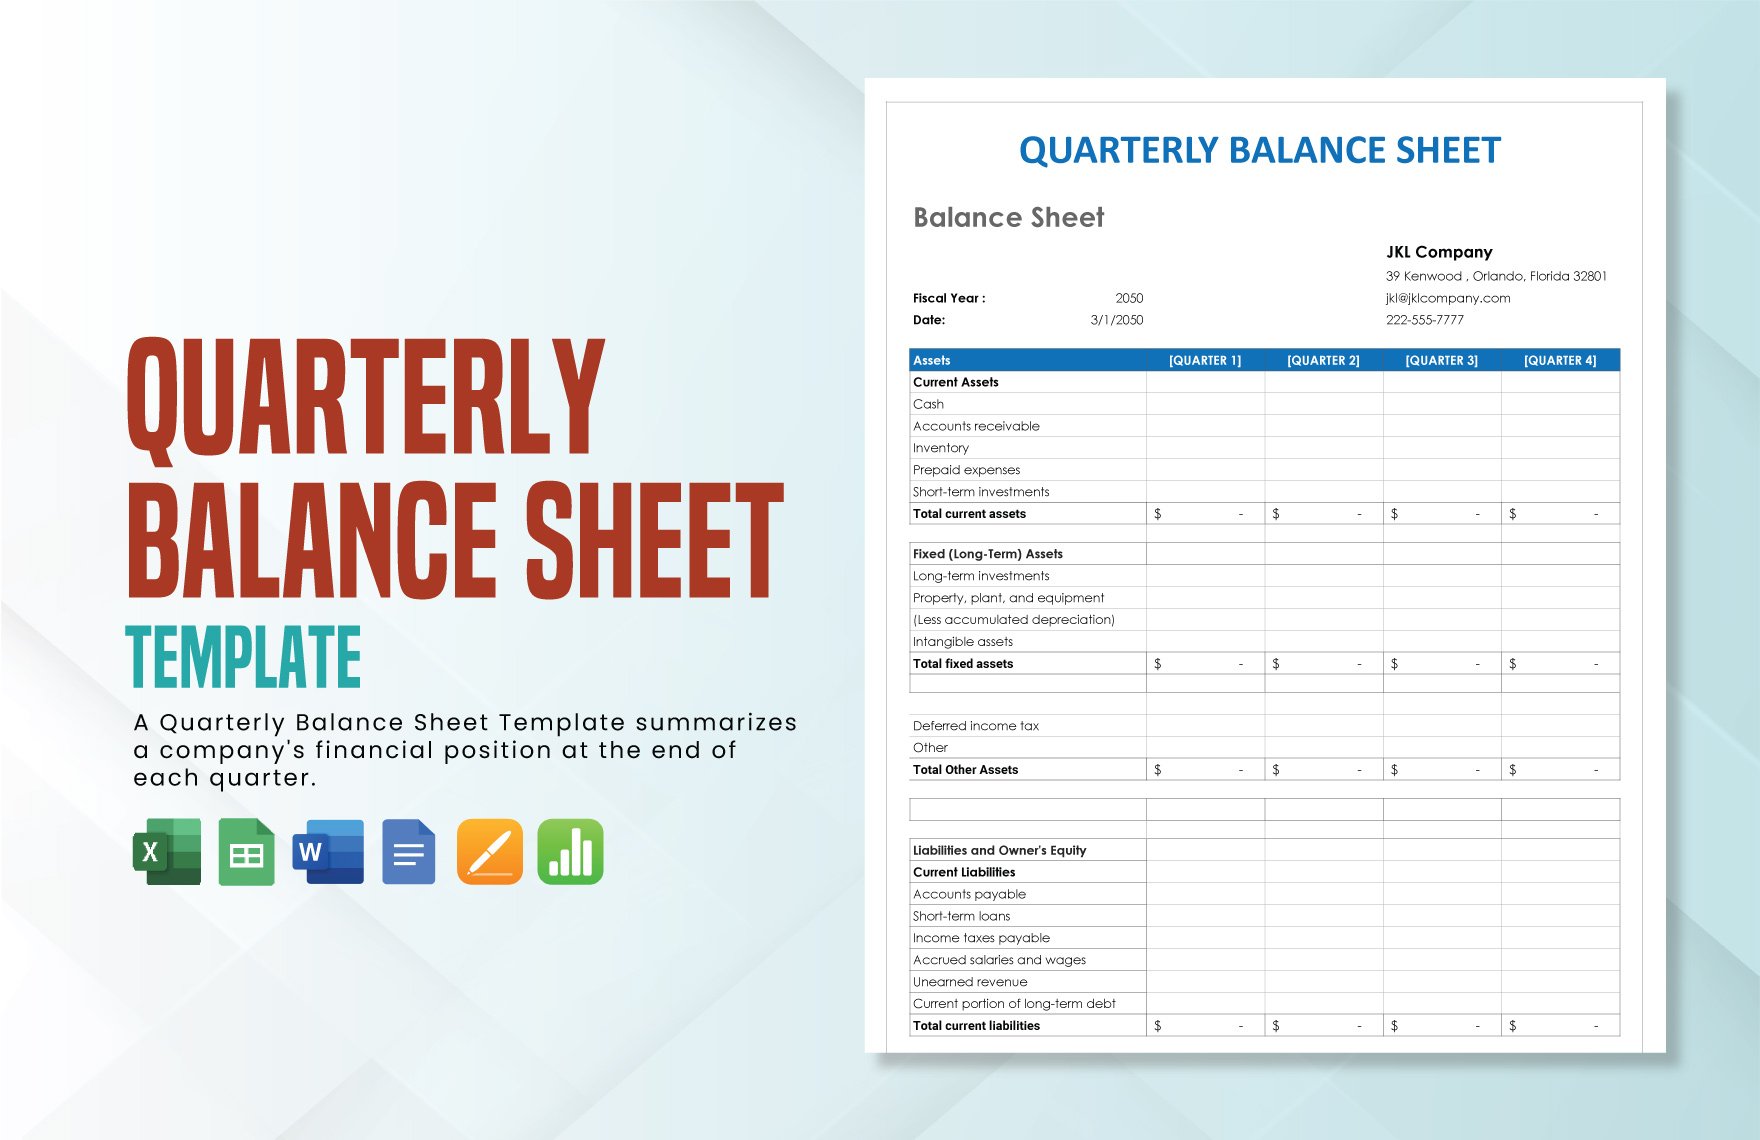 Free Quarterly Balance Sheet Template in Word, Google Docs, Excel, Google Sheets, Apple Pages, Apple Numbers